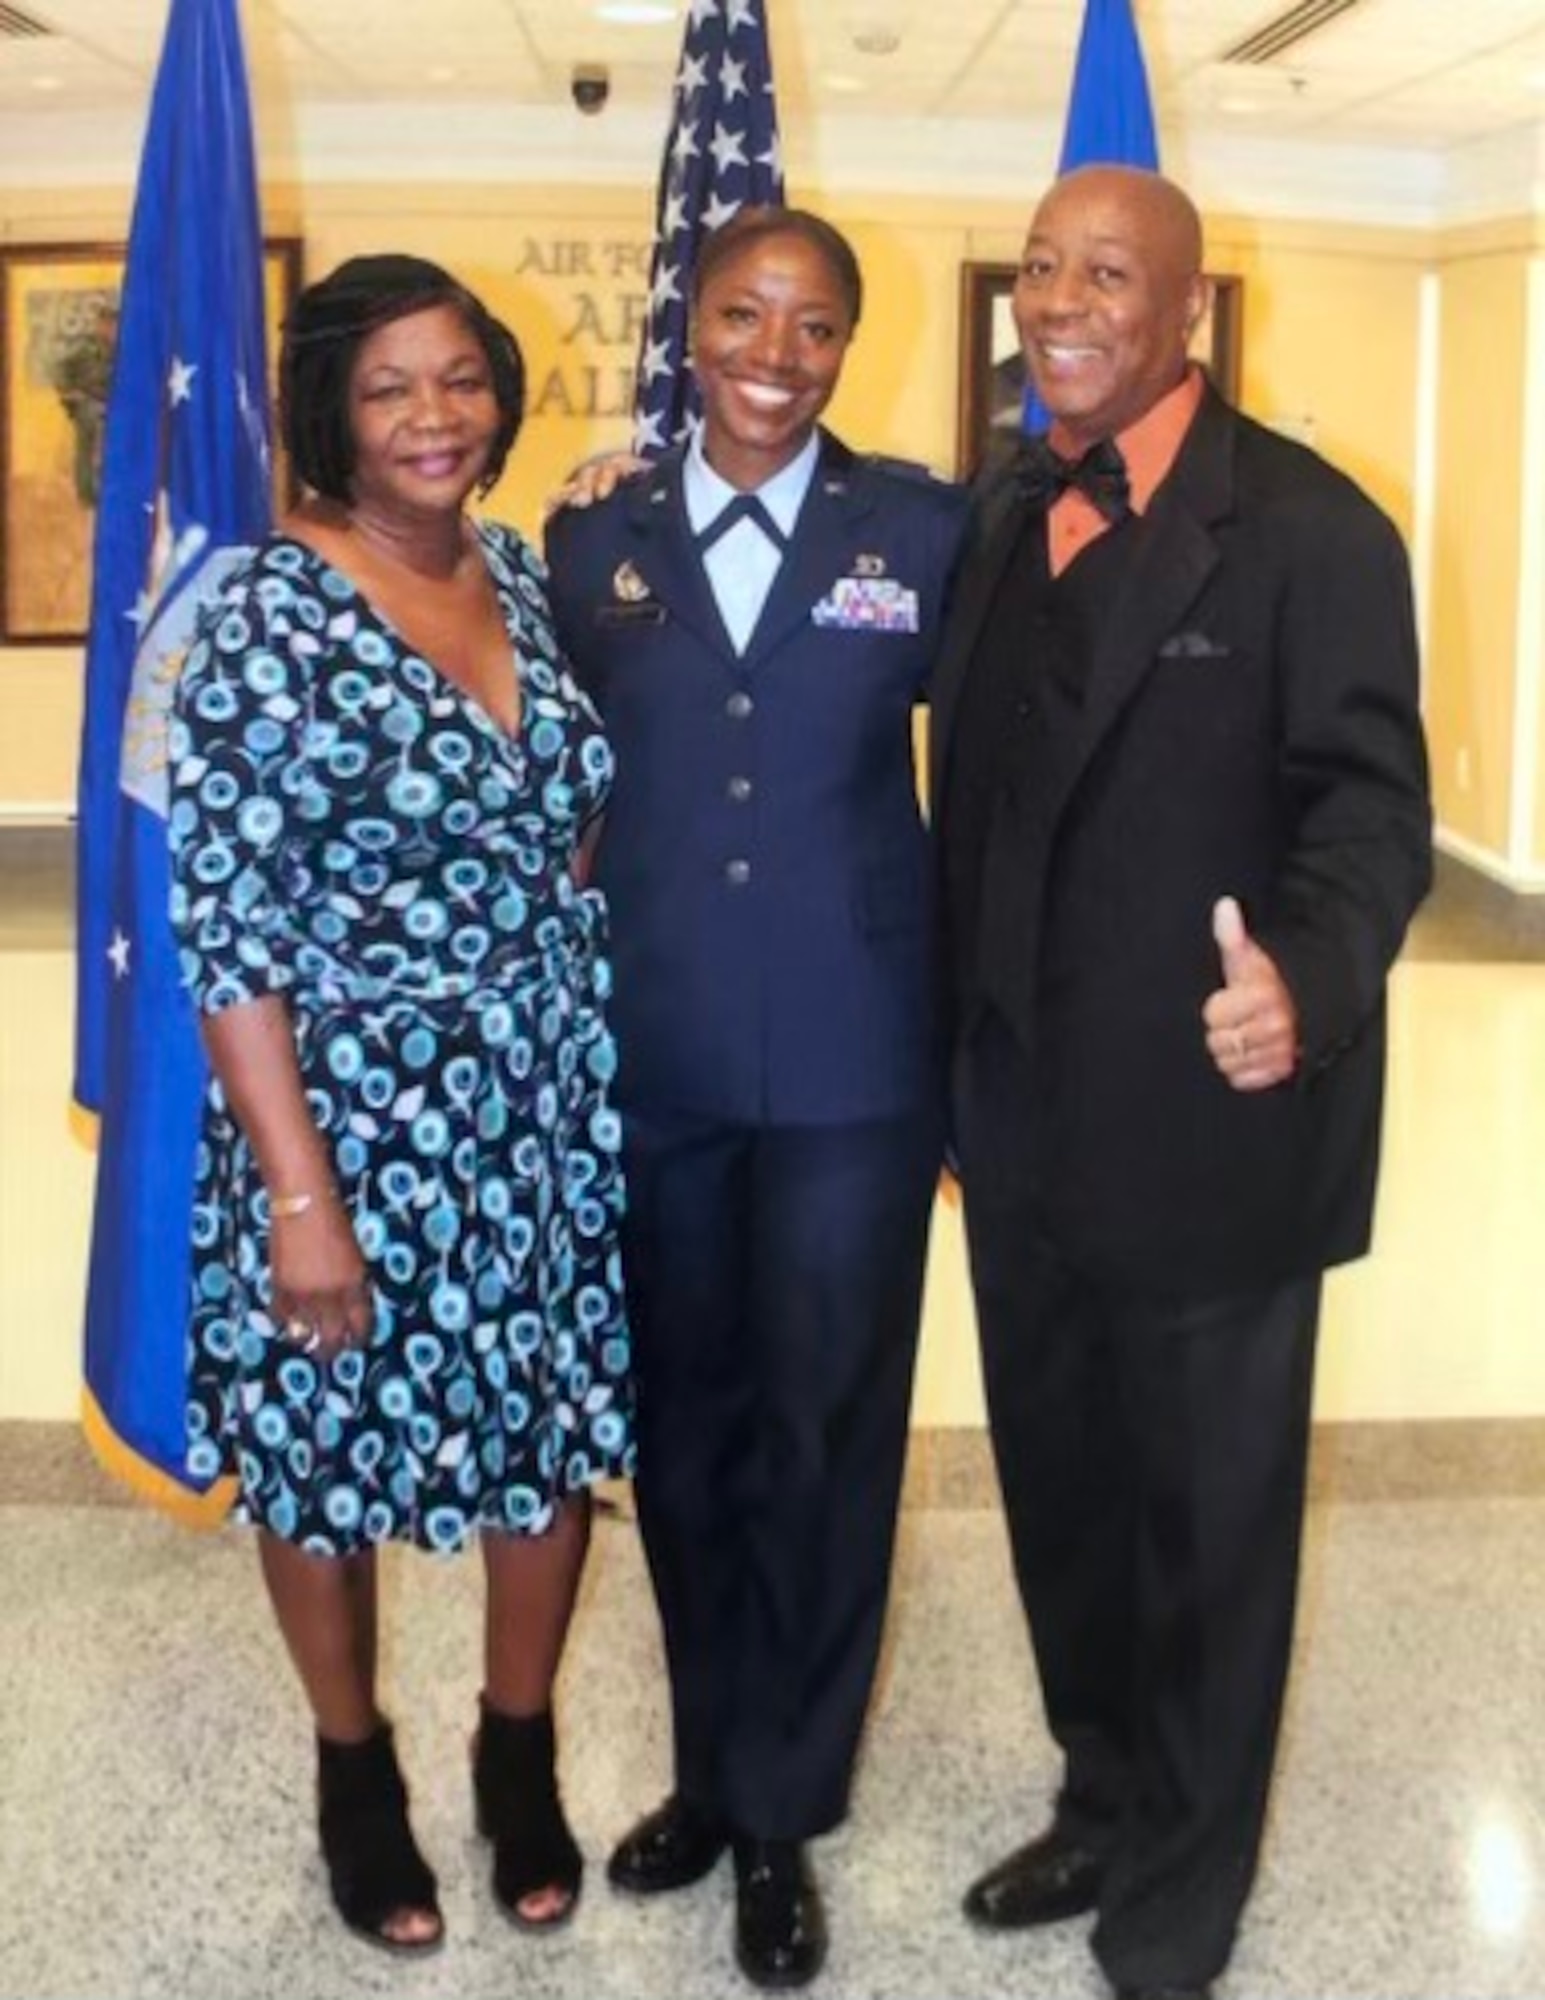 Lt. Col. Miriam Carter, 459th Force Support Squadron commander, poses for a photo with her parents Lenore Ayers and Errol Rivers during her promotion ceremony at the Pentagon, September 2018. (Courtesy Photo)